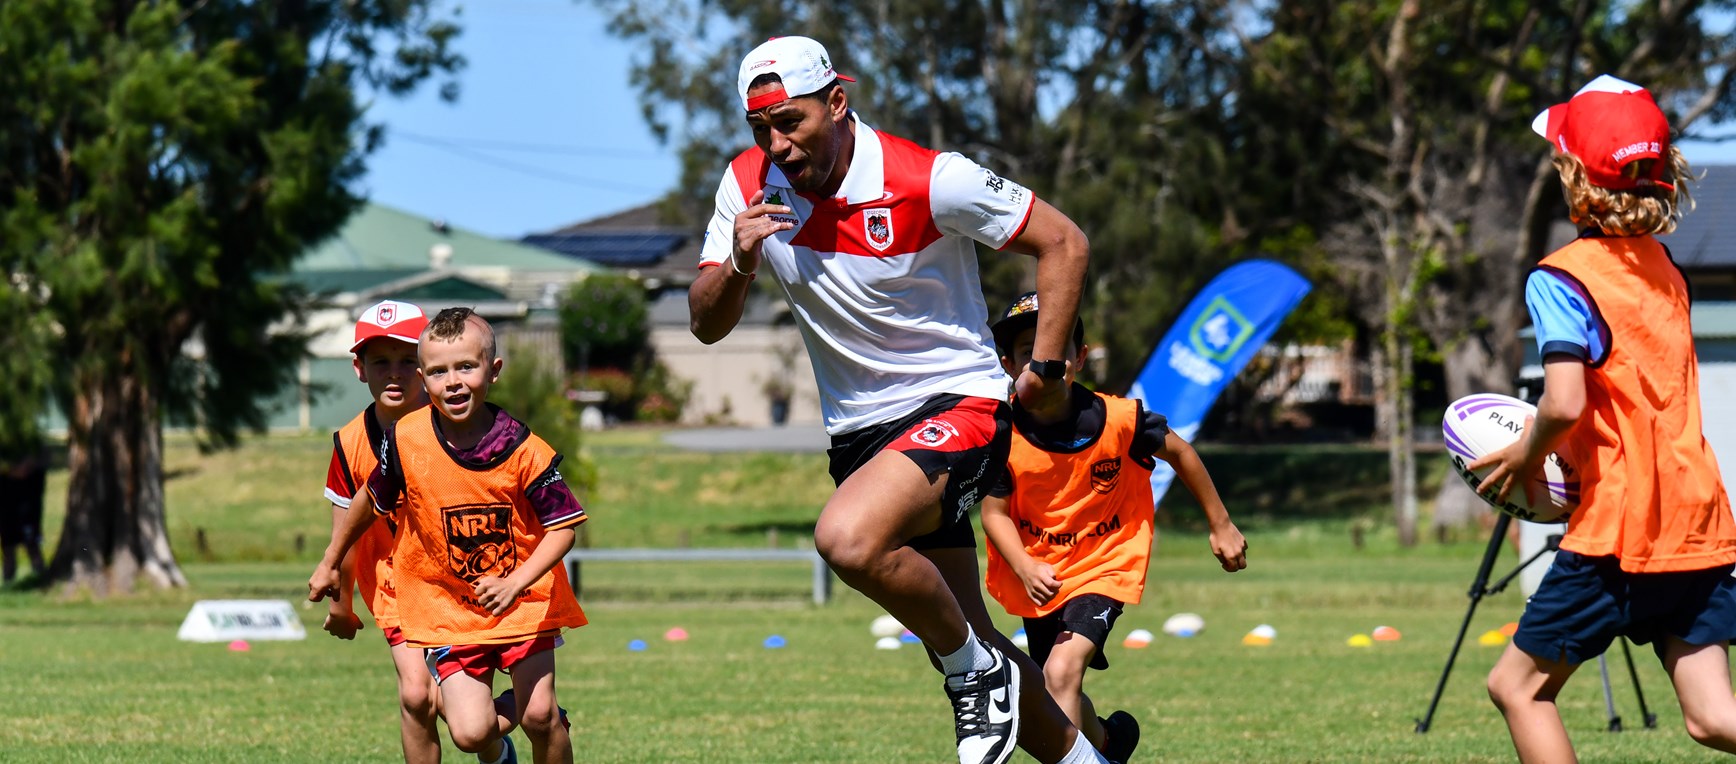 Dragons host gala day at Nowra